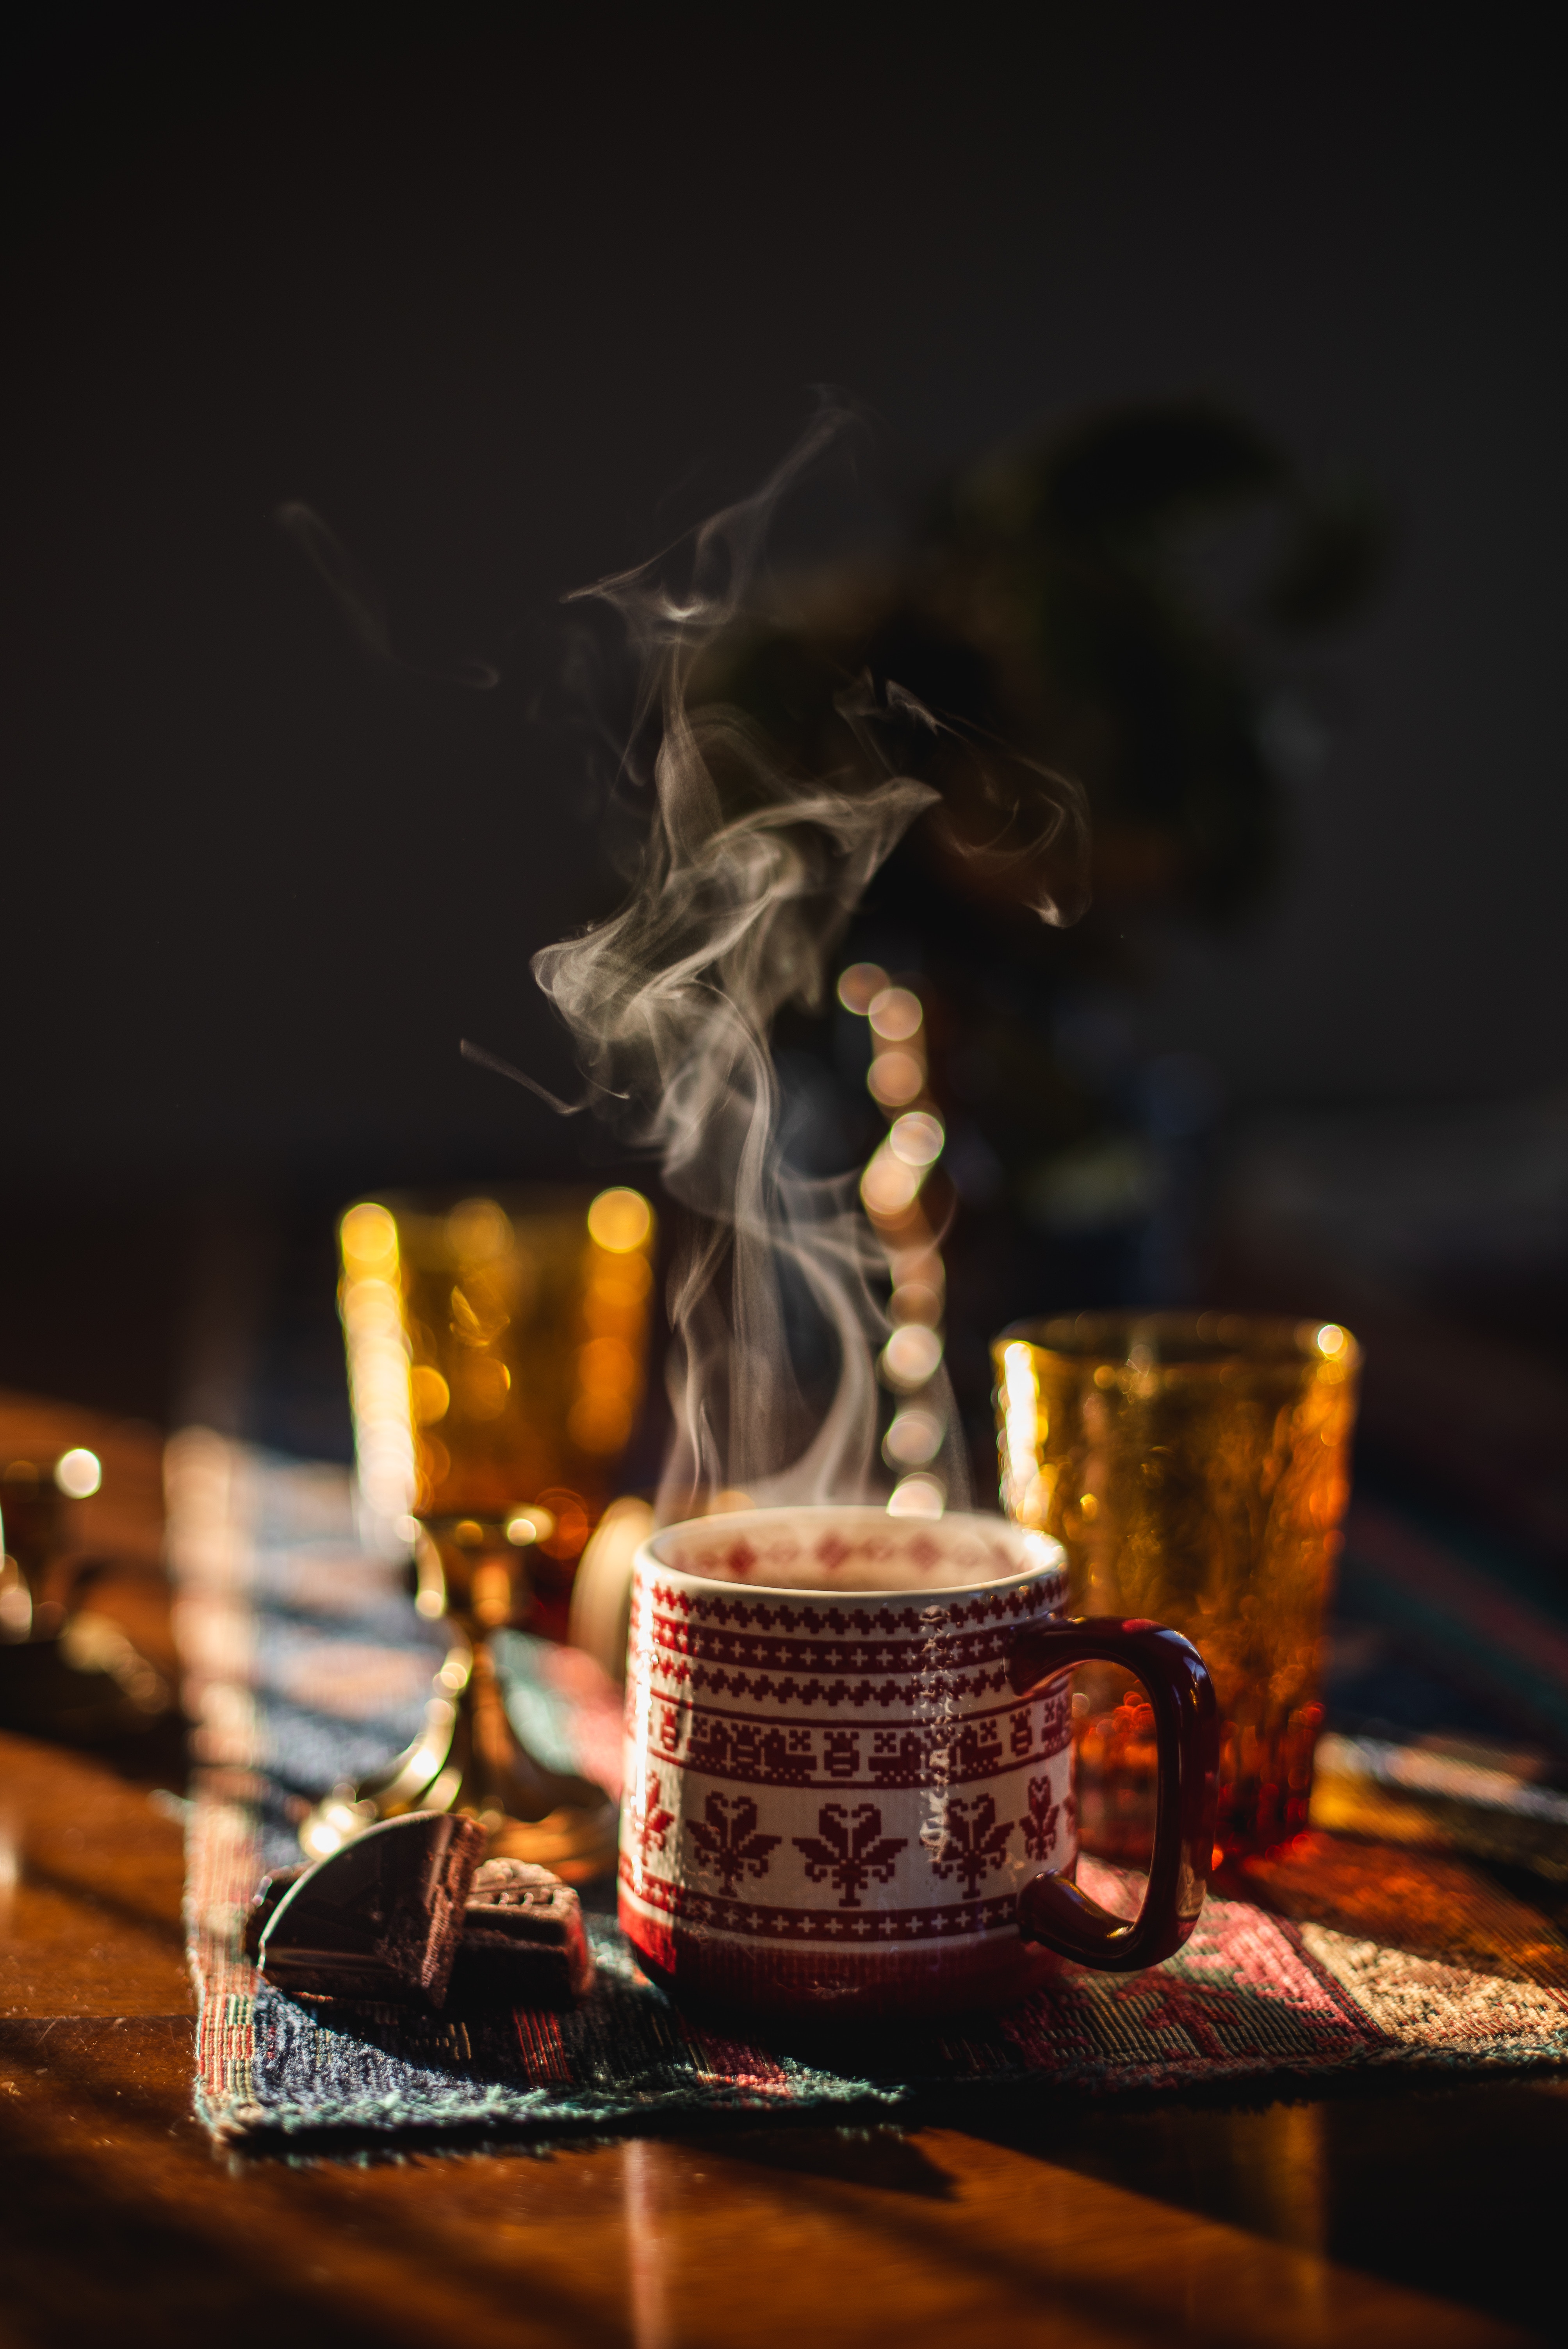 147684 download wallpaper food, cup, drink, beverage, coziness, comfort, steam, heat, warmth screensavers and pictures for free